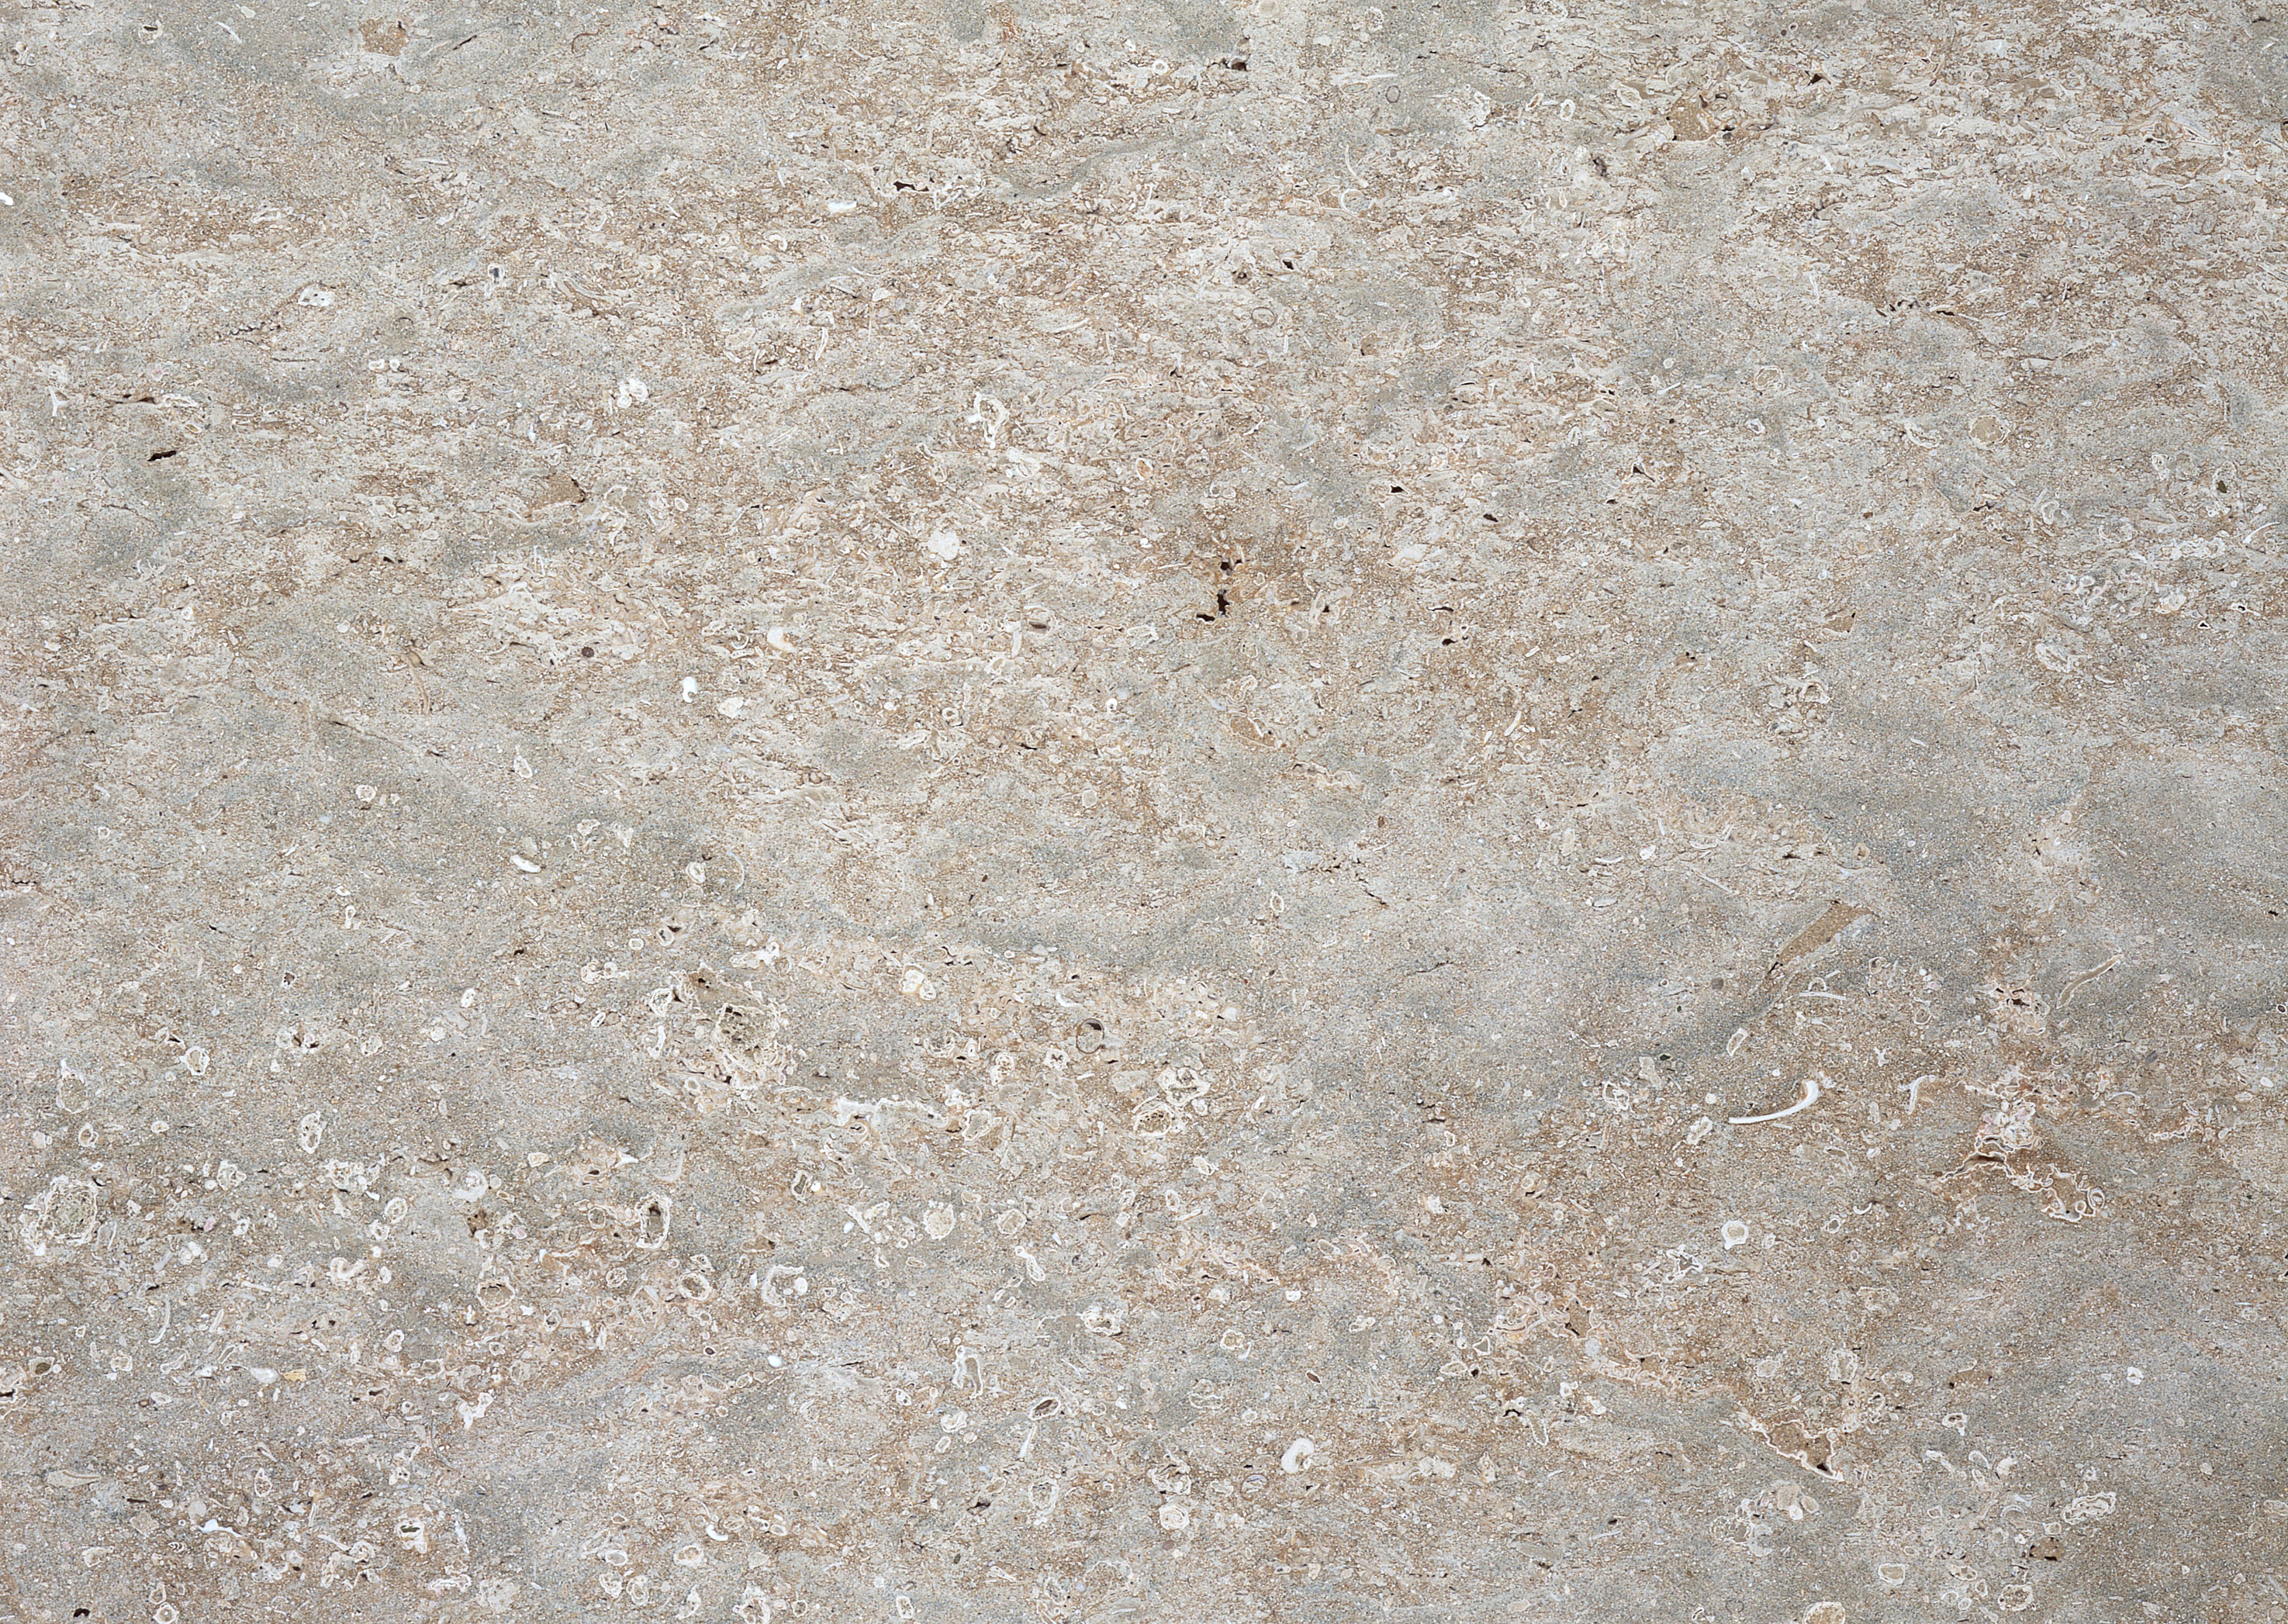 Marble Stone Background One Hundred and Sixty-eight | Photo Texture ...